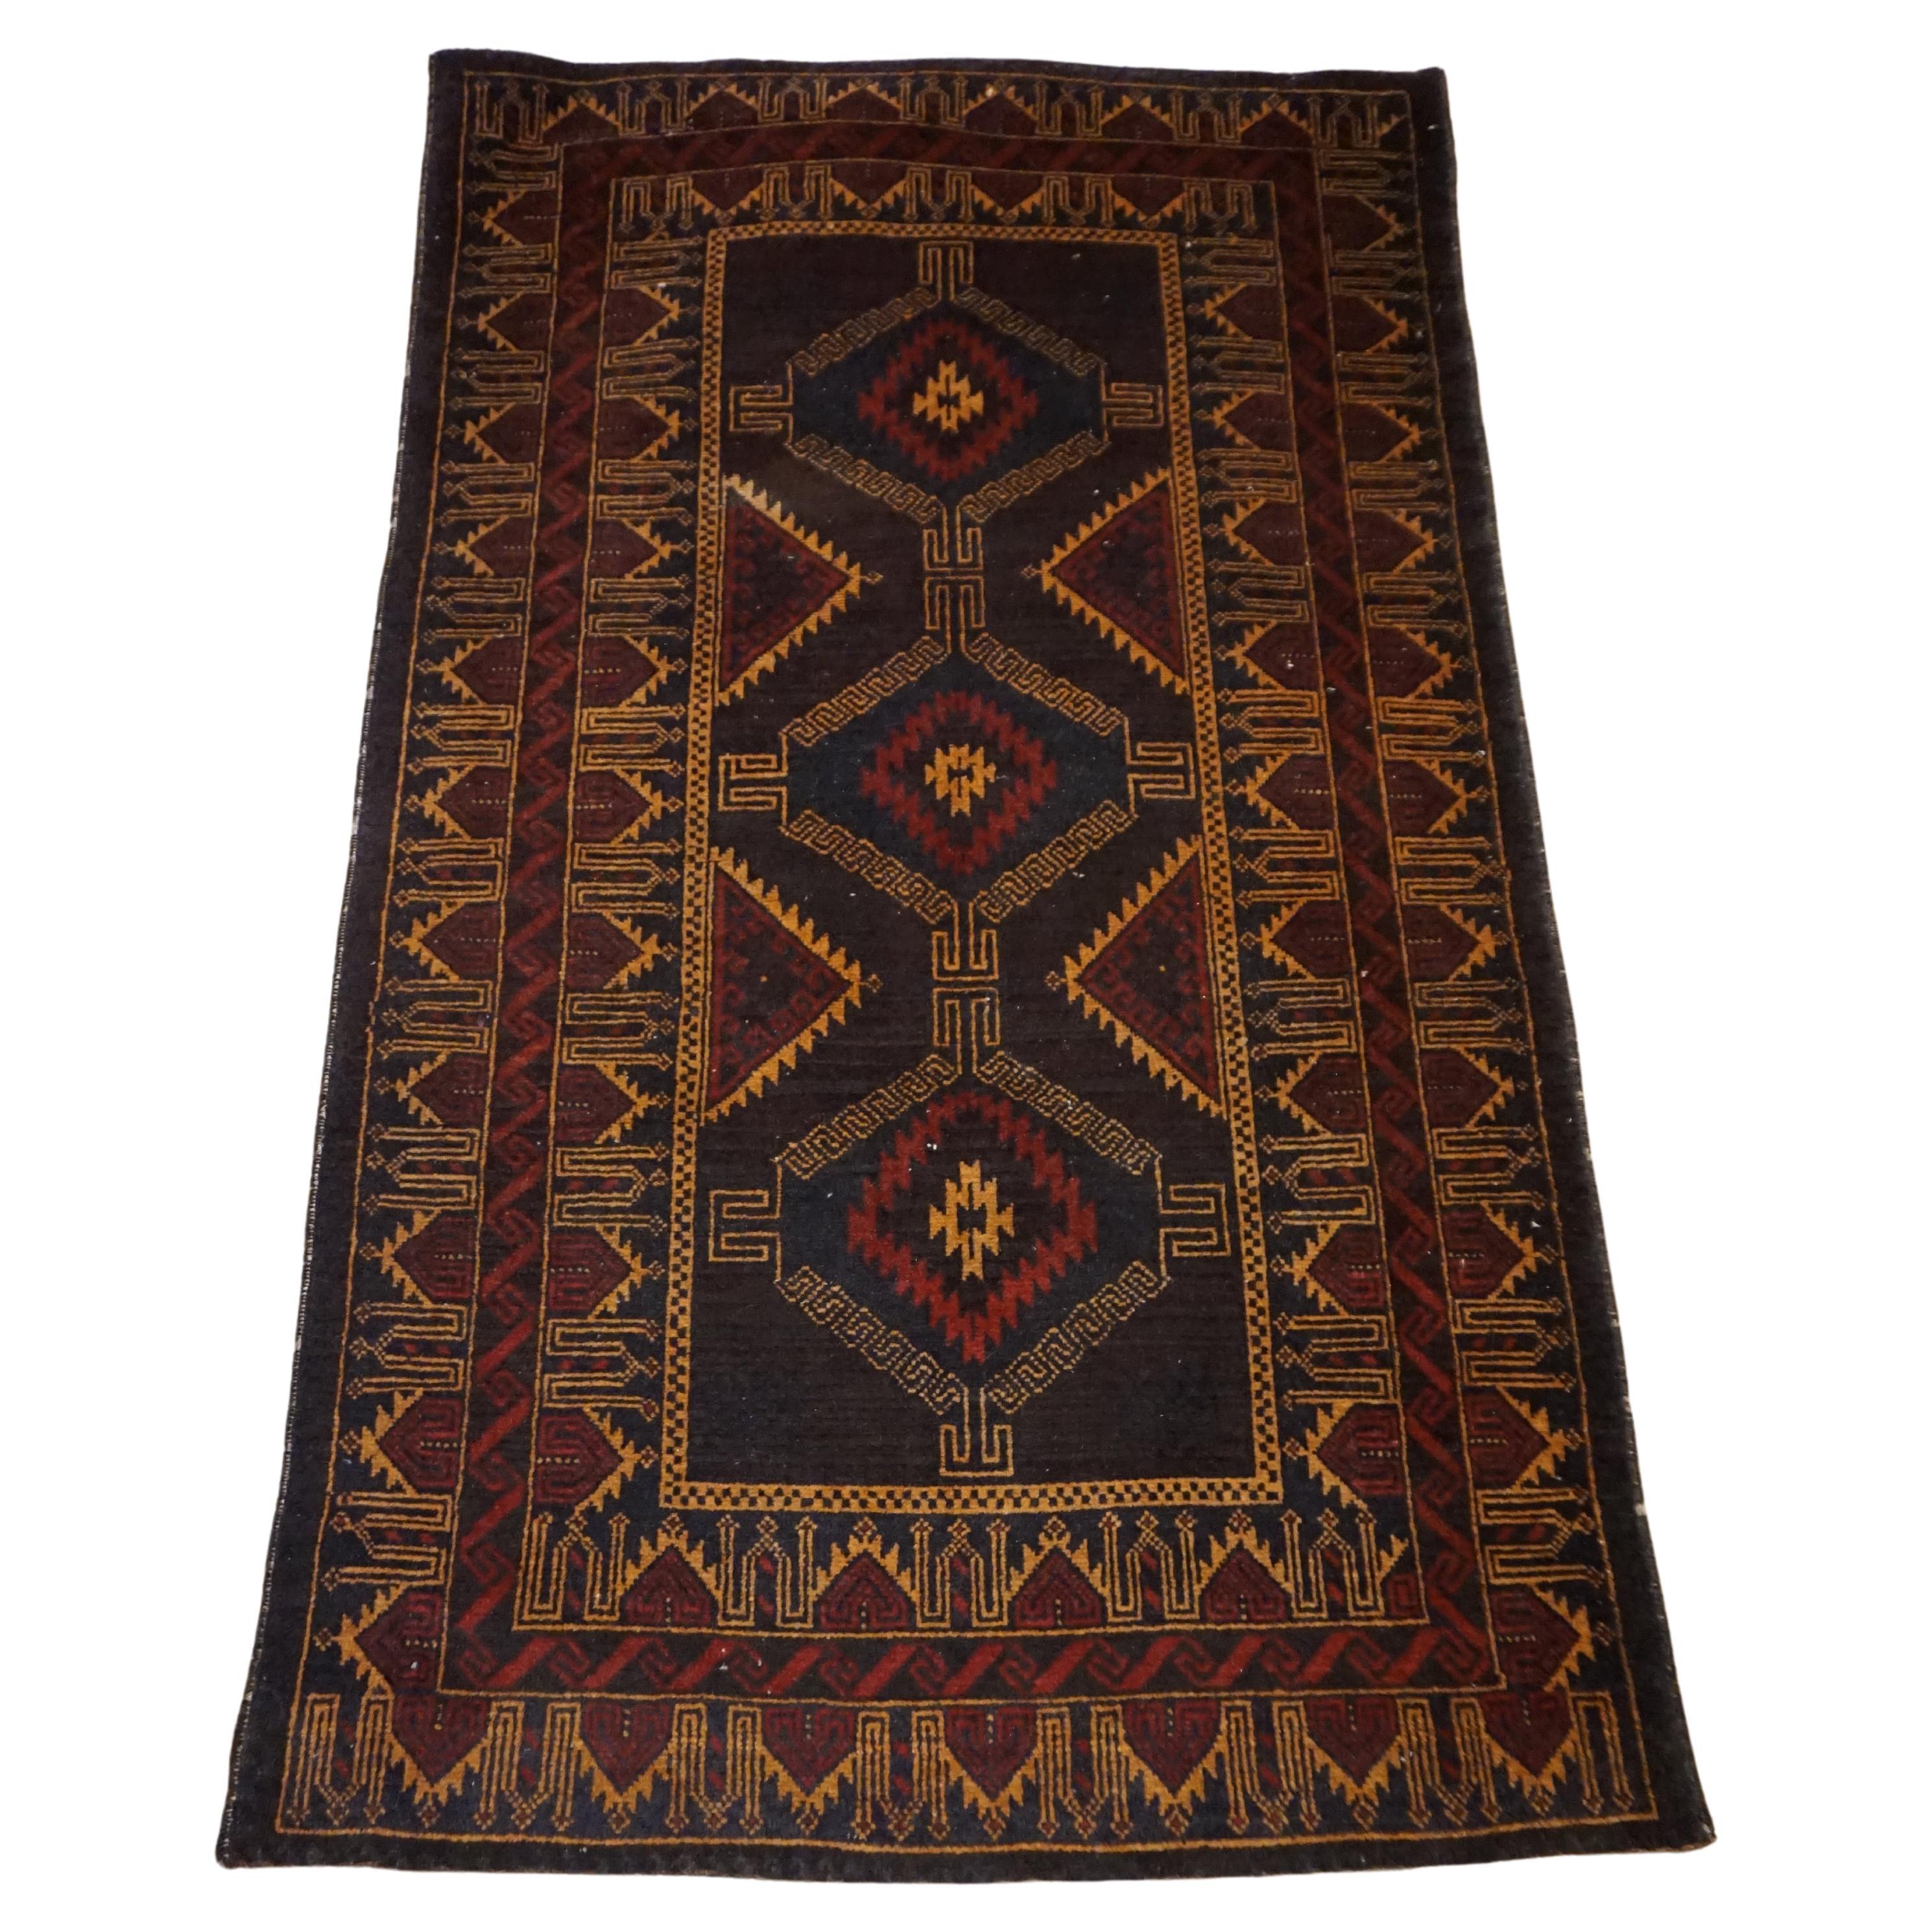 Fine Hand Knotted Semi-Antique Wool Baluch Tribal Rug